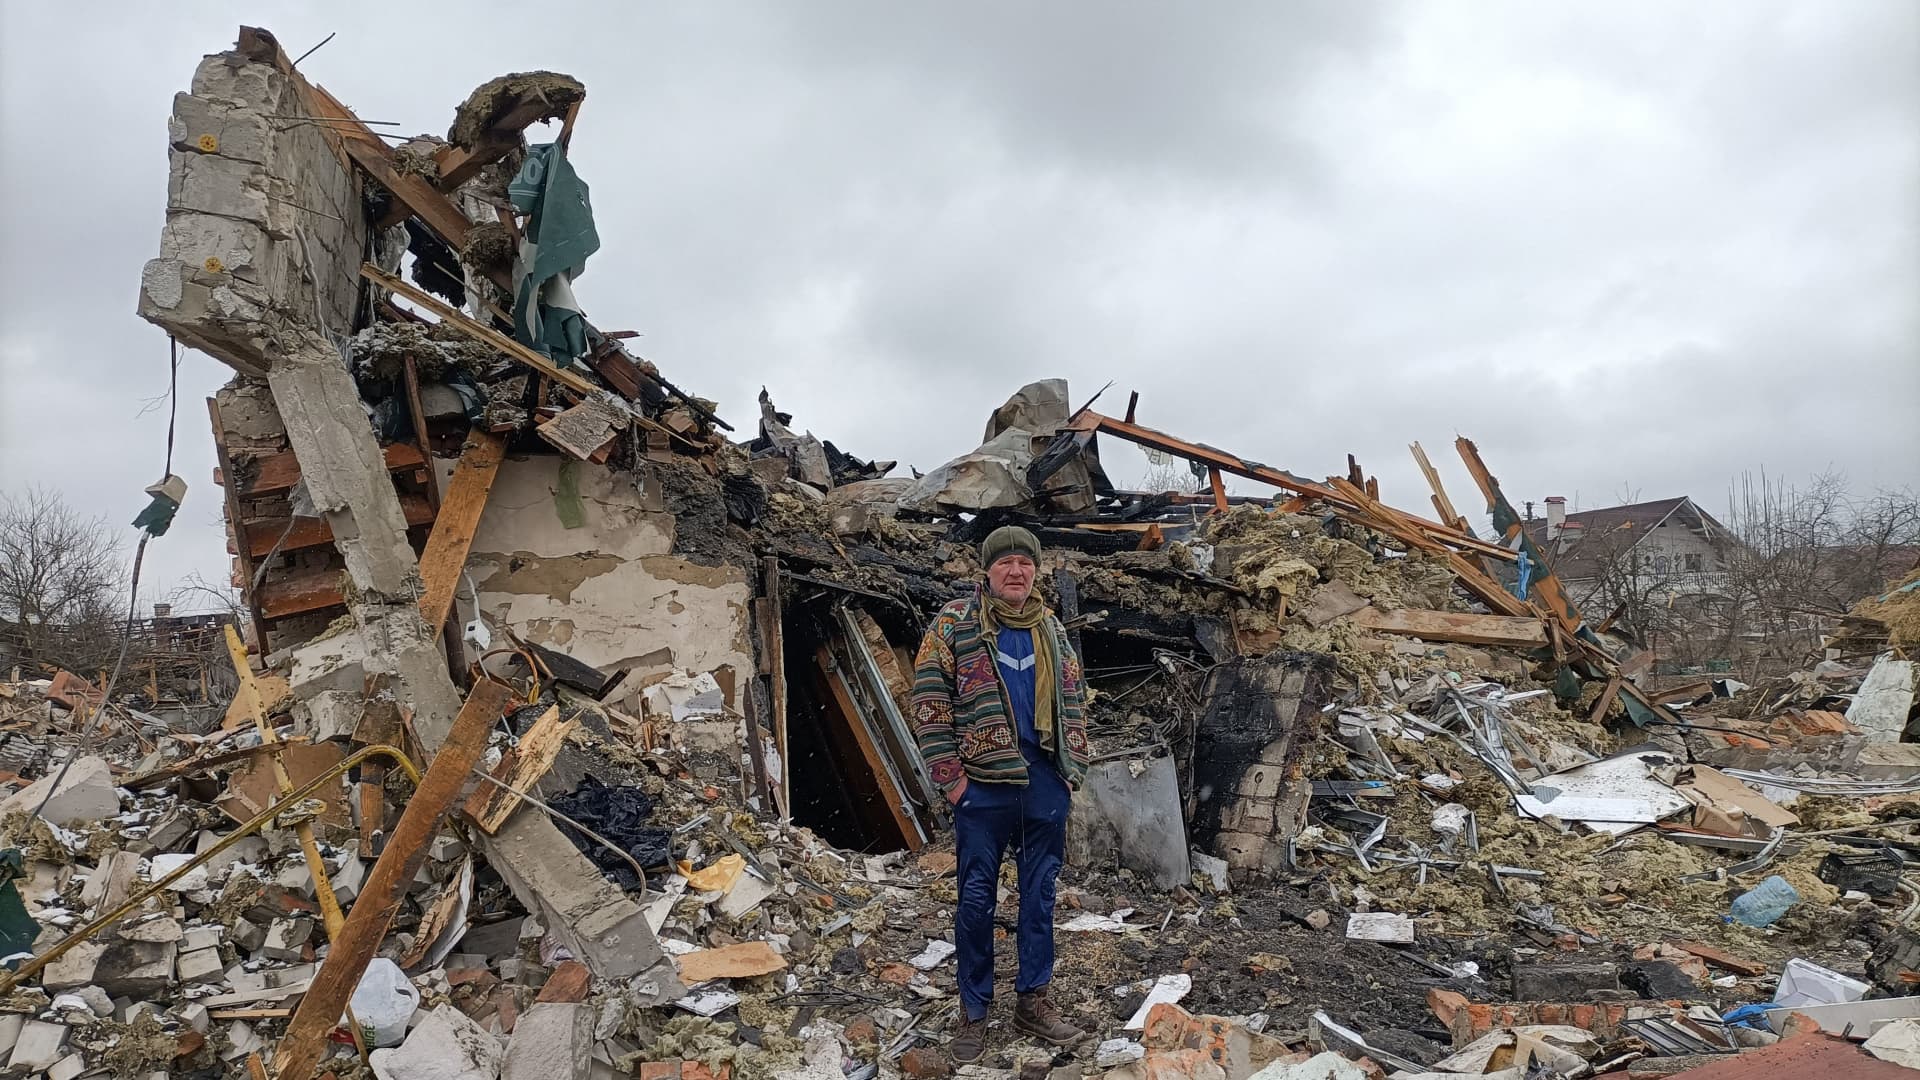 A Ukrainian man stands in the rubble in Zhytomyr on March 02, 2022, following a Russian bombing the day before.